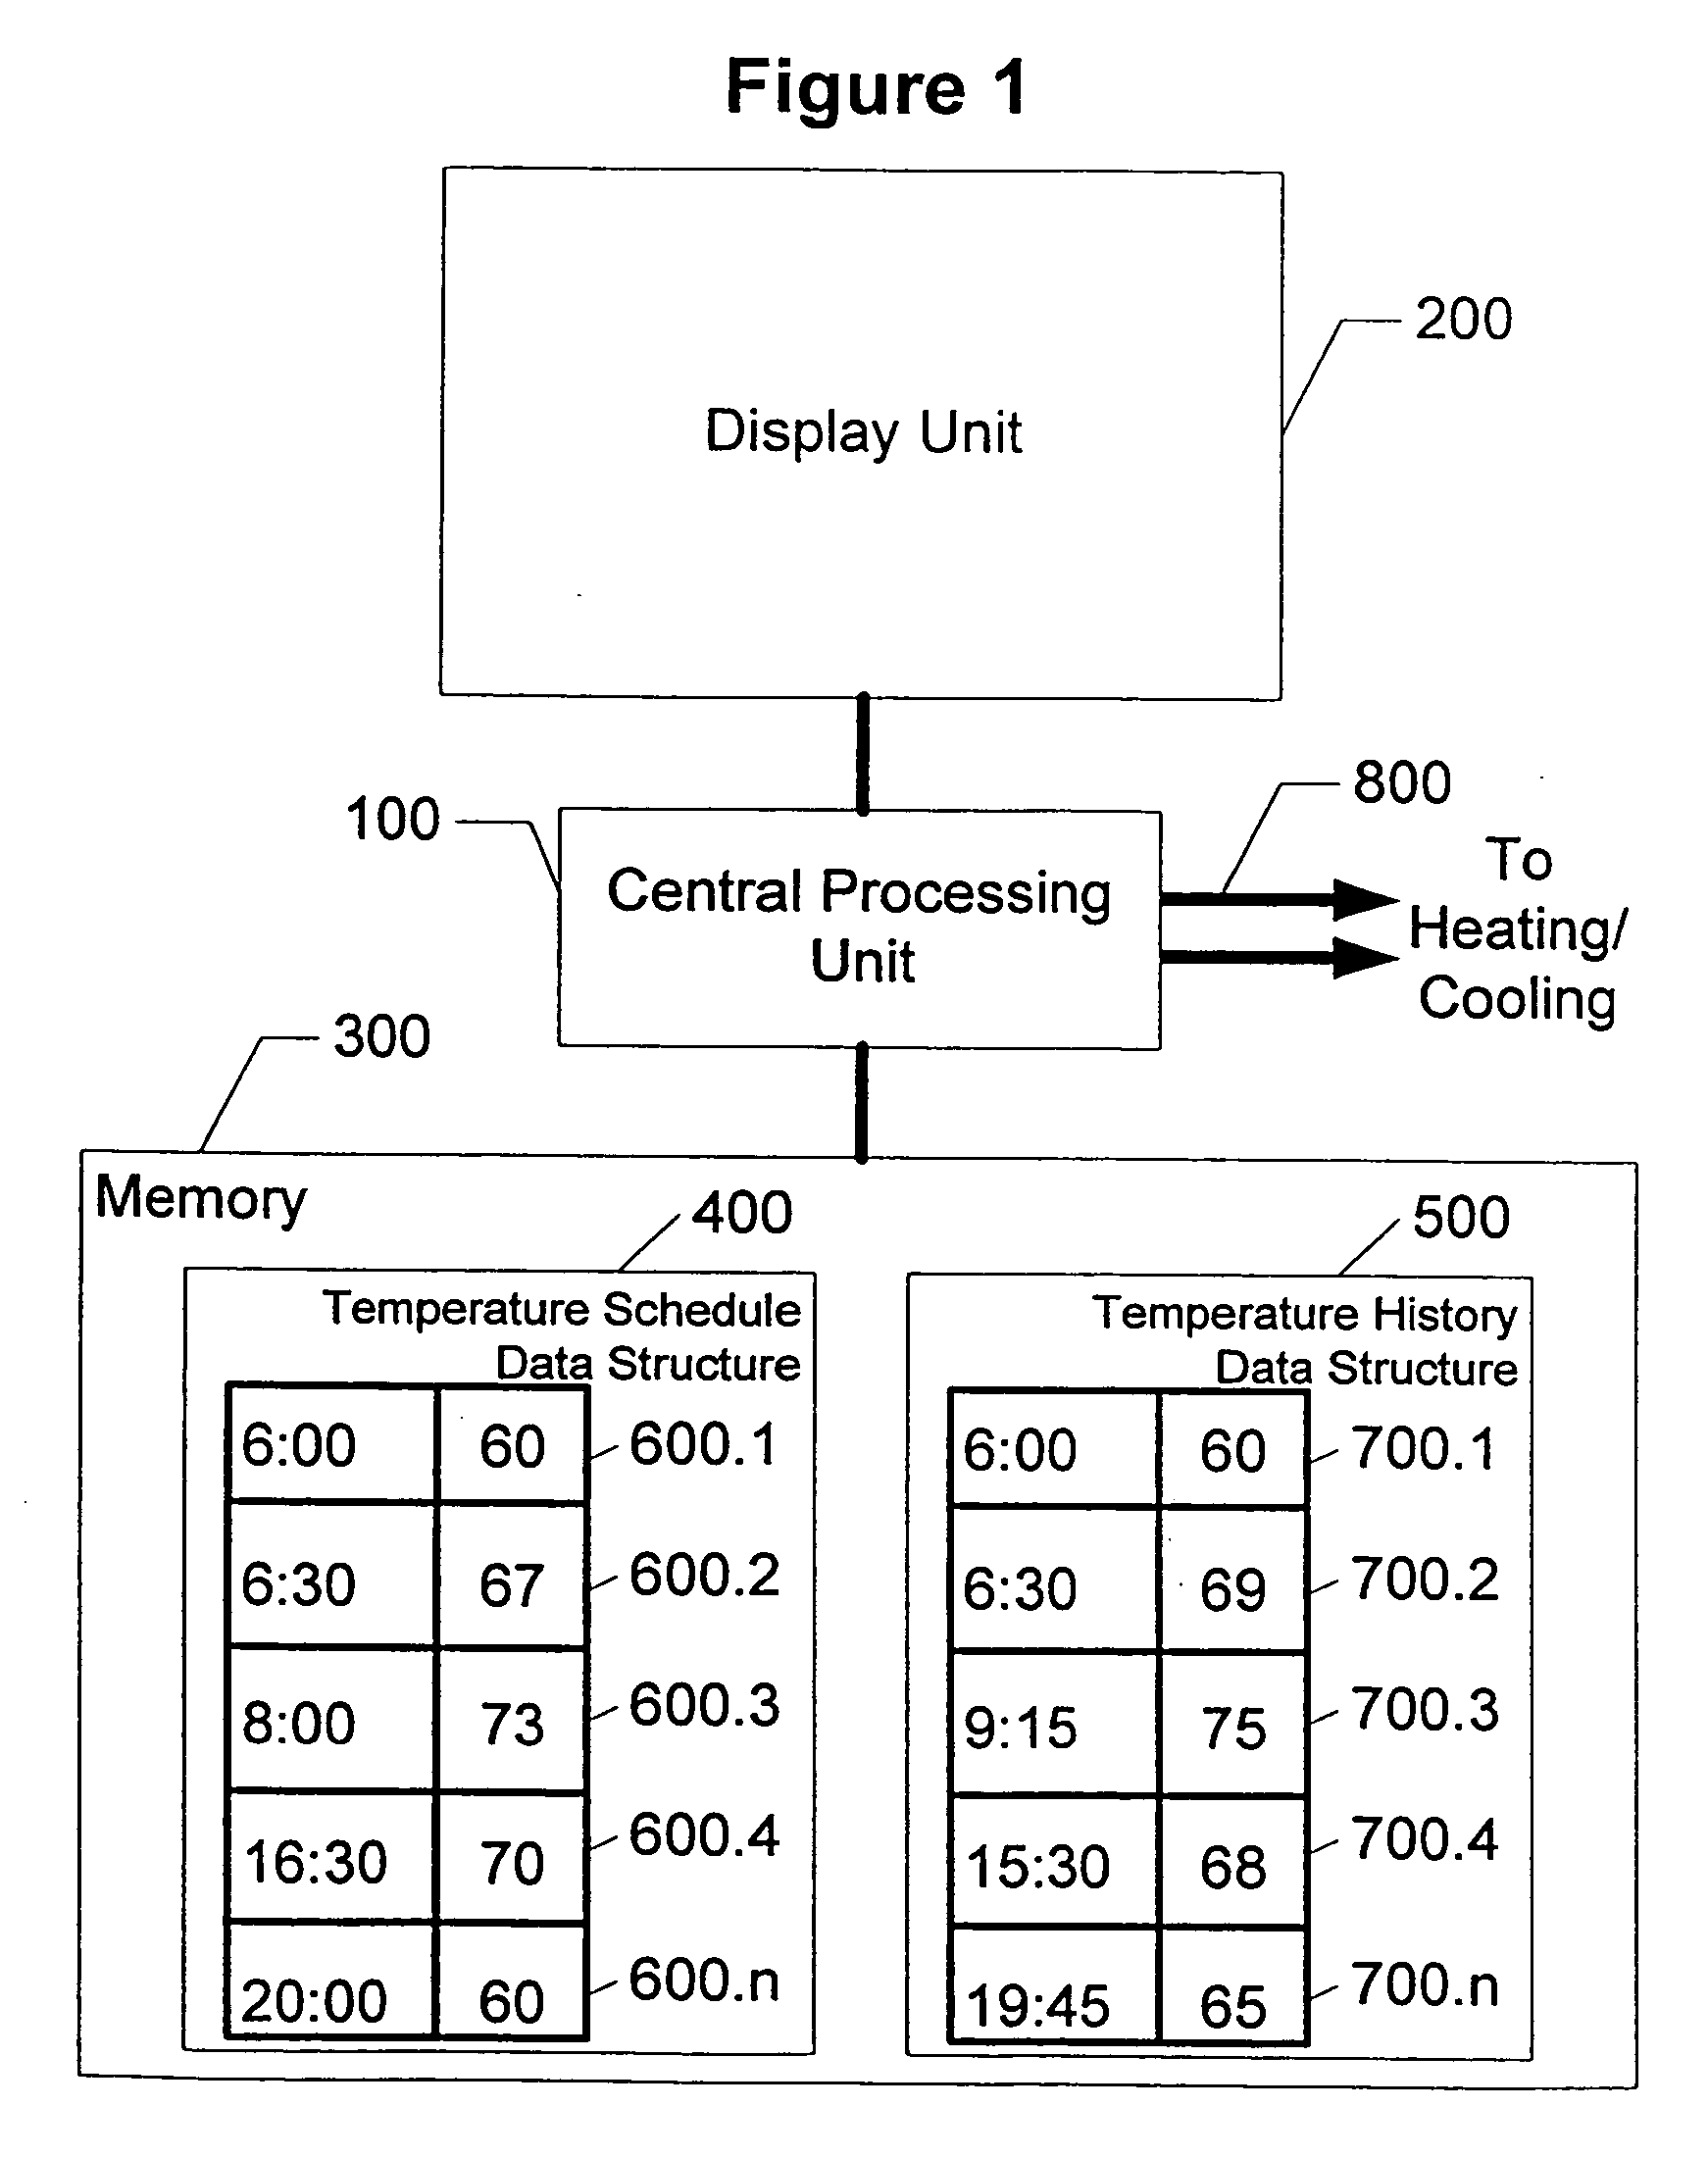 Graphical user interface system for a thermal comfort controller